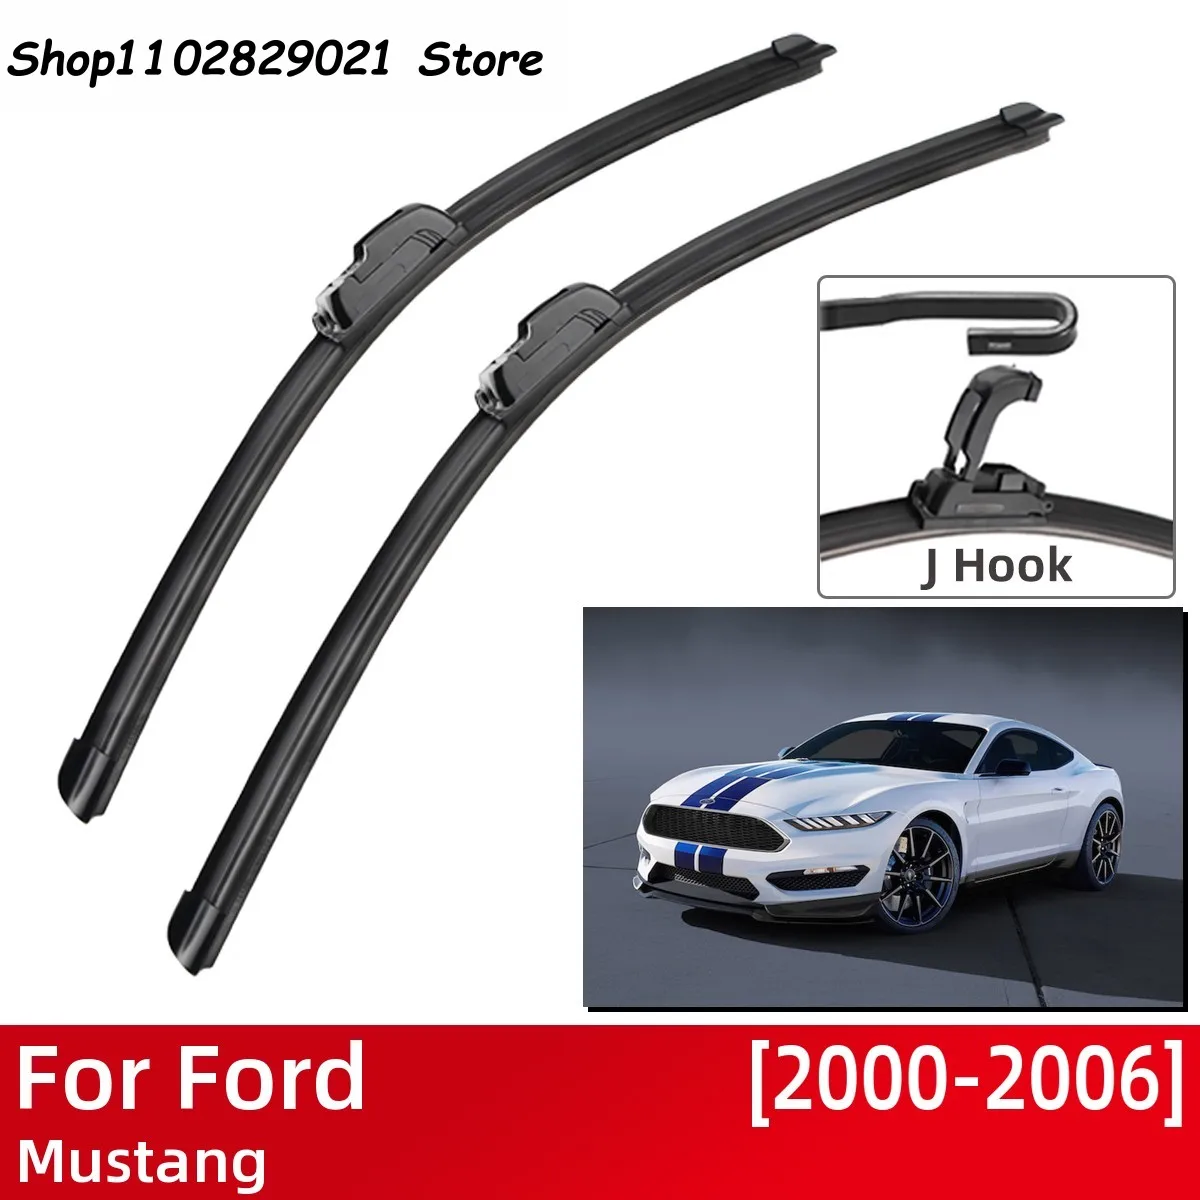 

For Ford Mustang 2000-2006 Car Accessories Front Windscreen Wiper Blade Brushes Wipers U Type J Hooks 2006 2005 2004 2003 2002